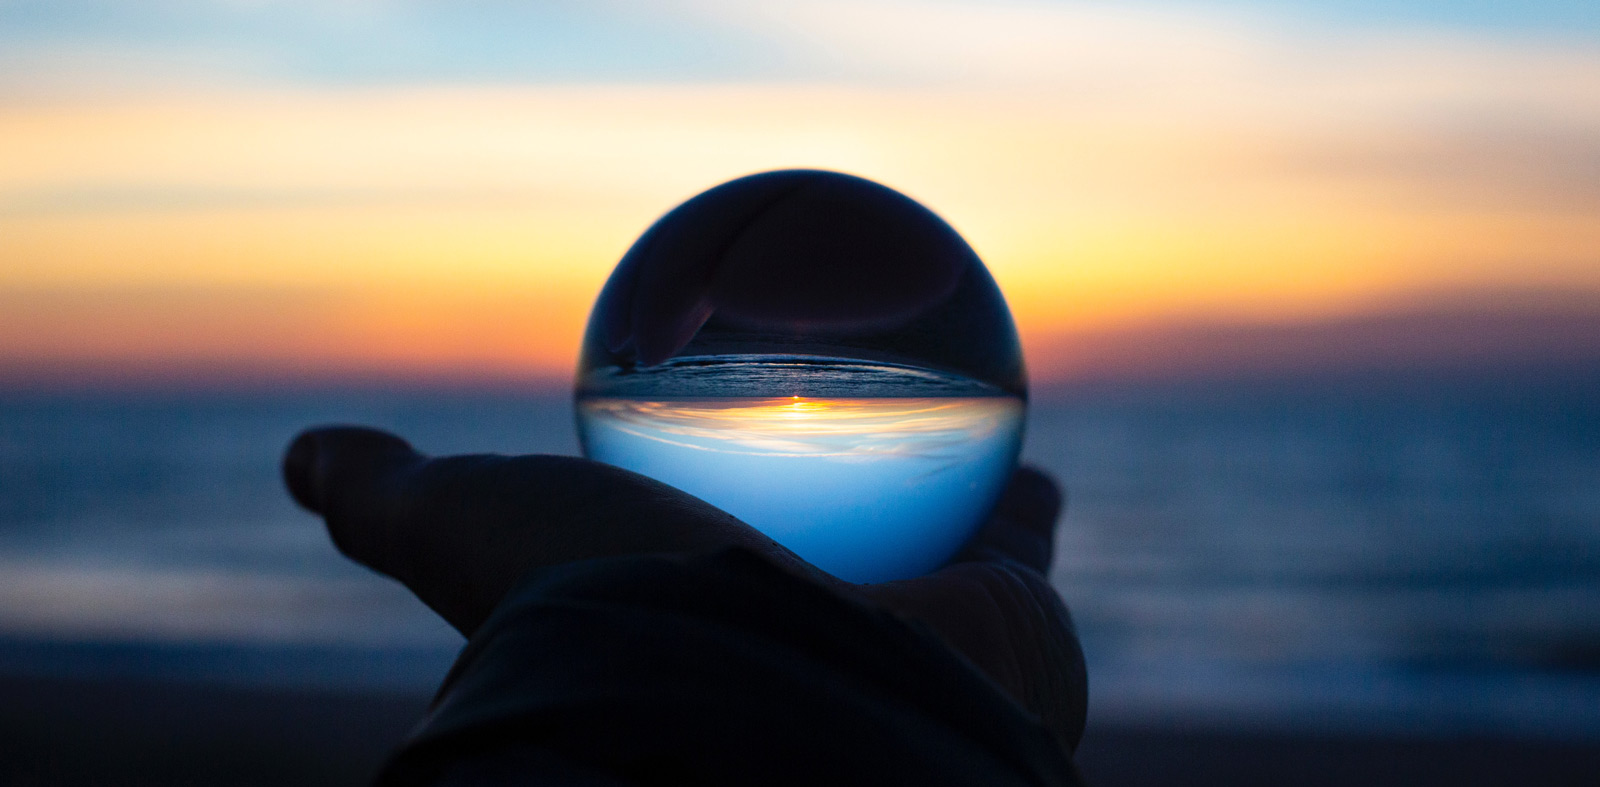 Man holding a crystal ball in his hand